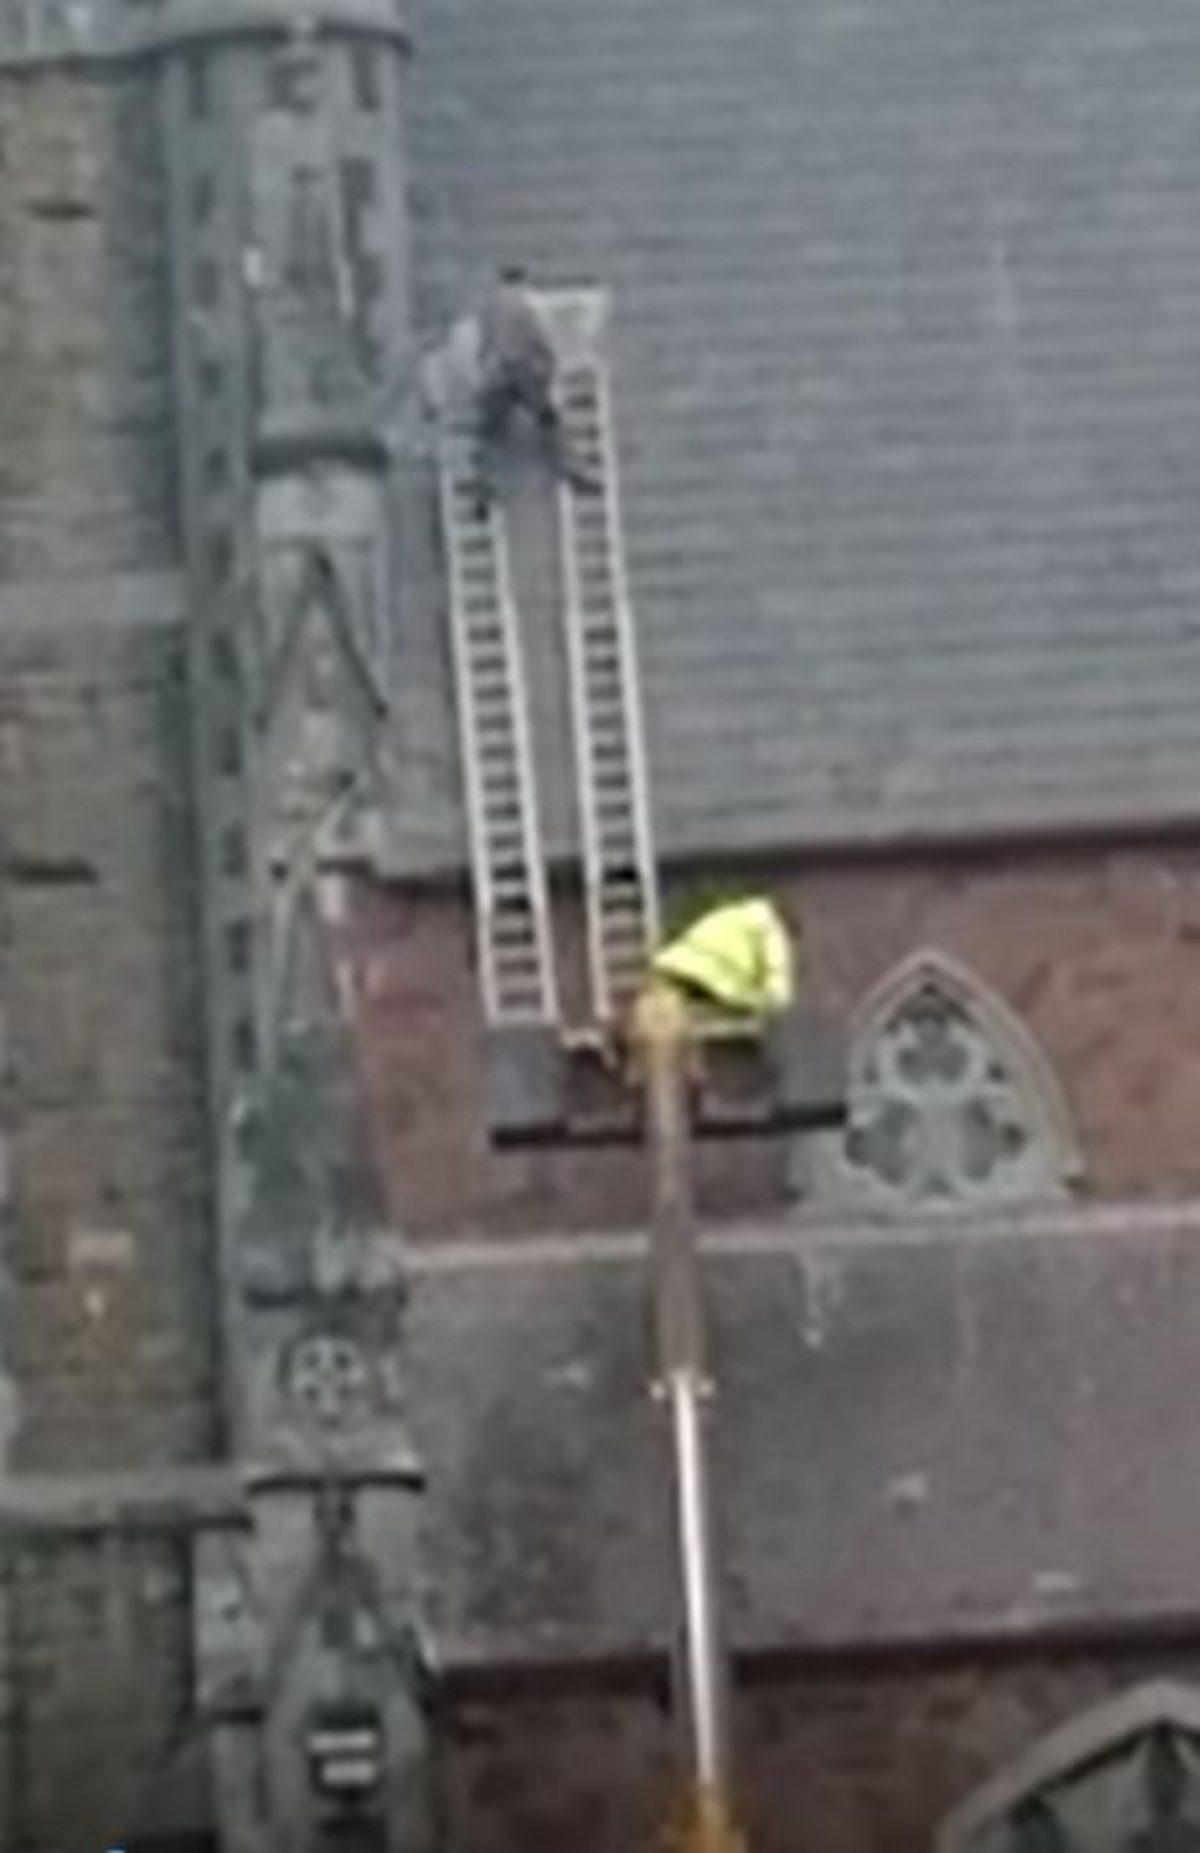 The workman stands between two ladders